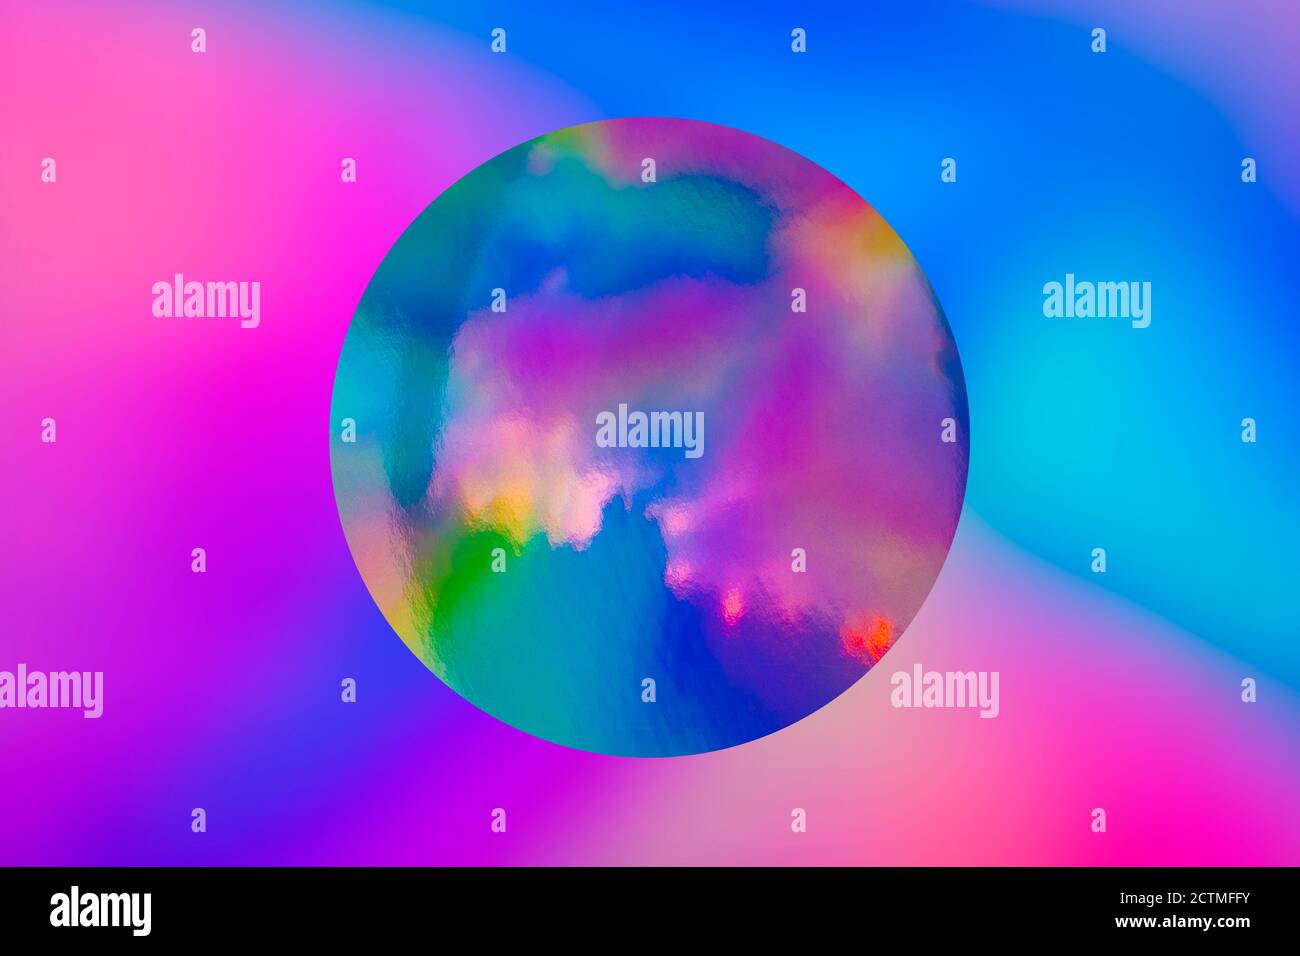 Abstract spectrum vaporwave holographic blended colors with circle shape, trendy colorful artwork in pastel neon hue Stock Photo